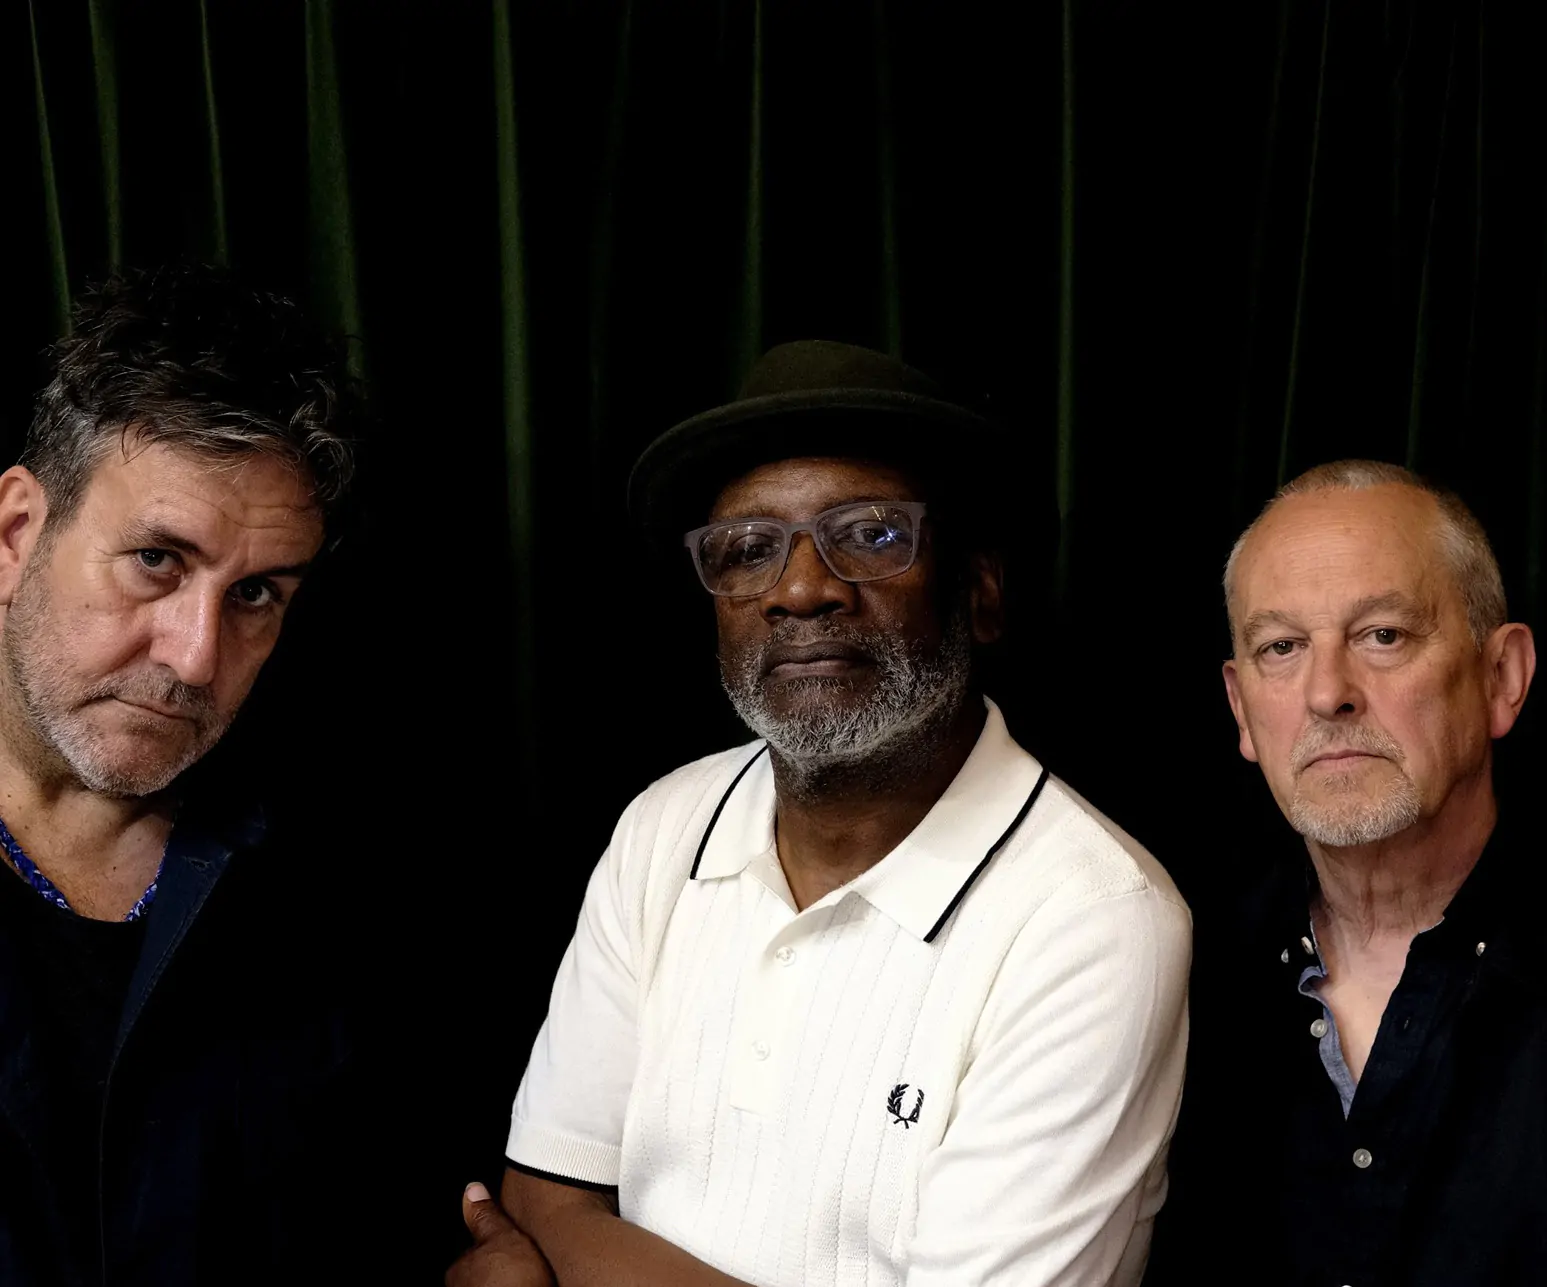 THE SPECIALS return with the release of their brand new album ‘Protest Songs – 1924 -2012’